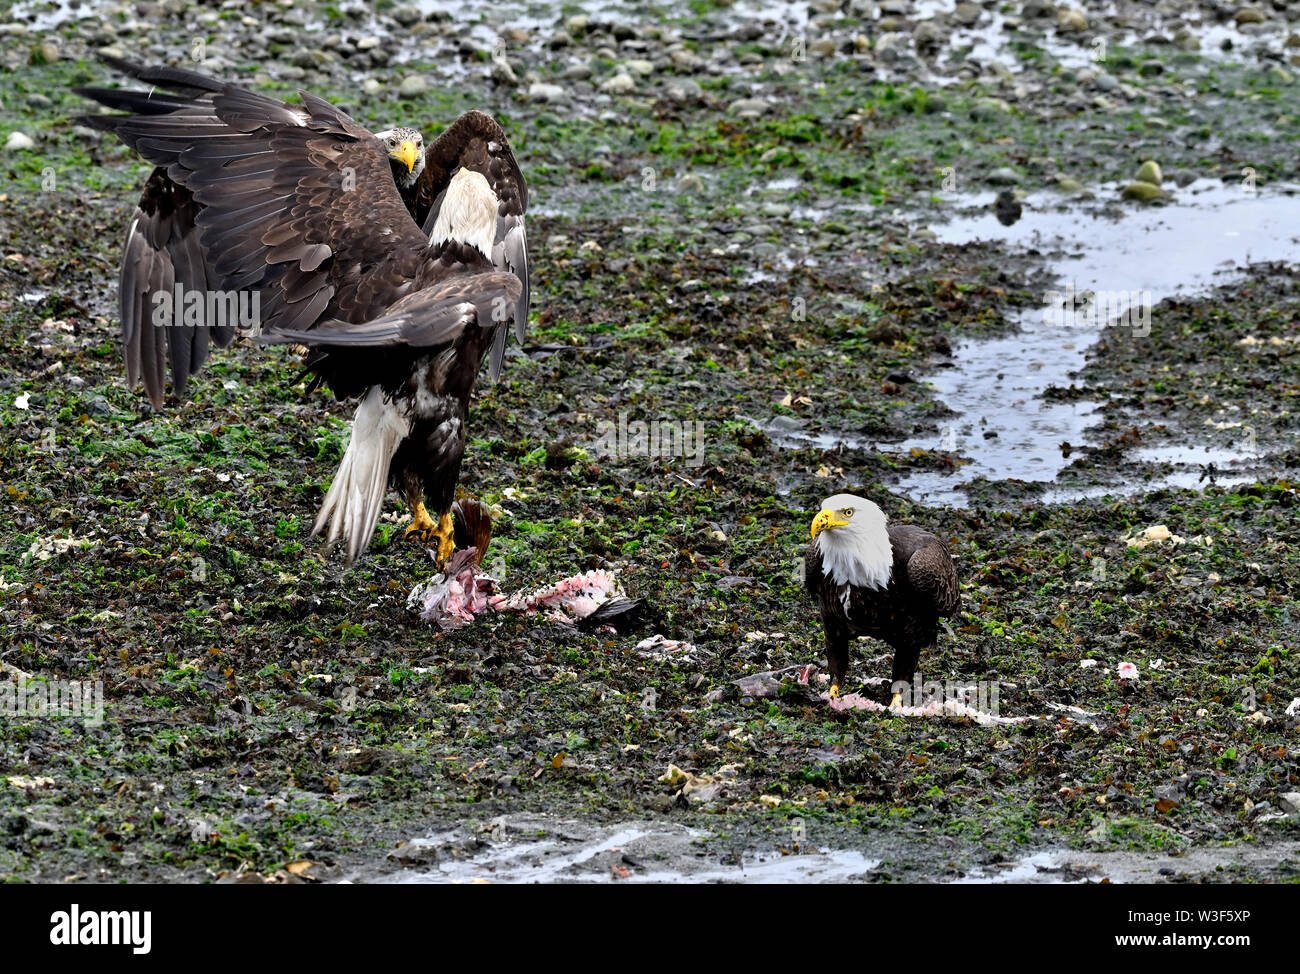 Two eagles fighting over fish. Stock Photo